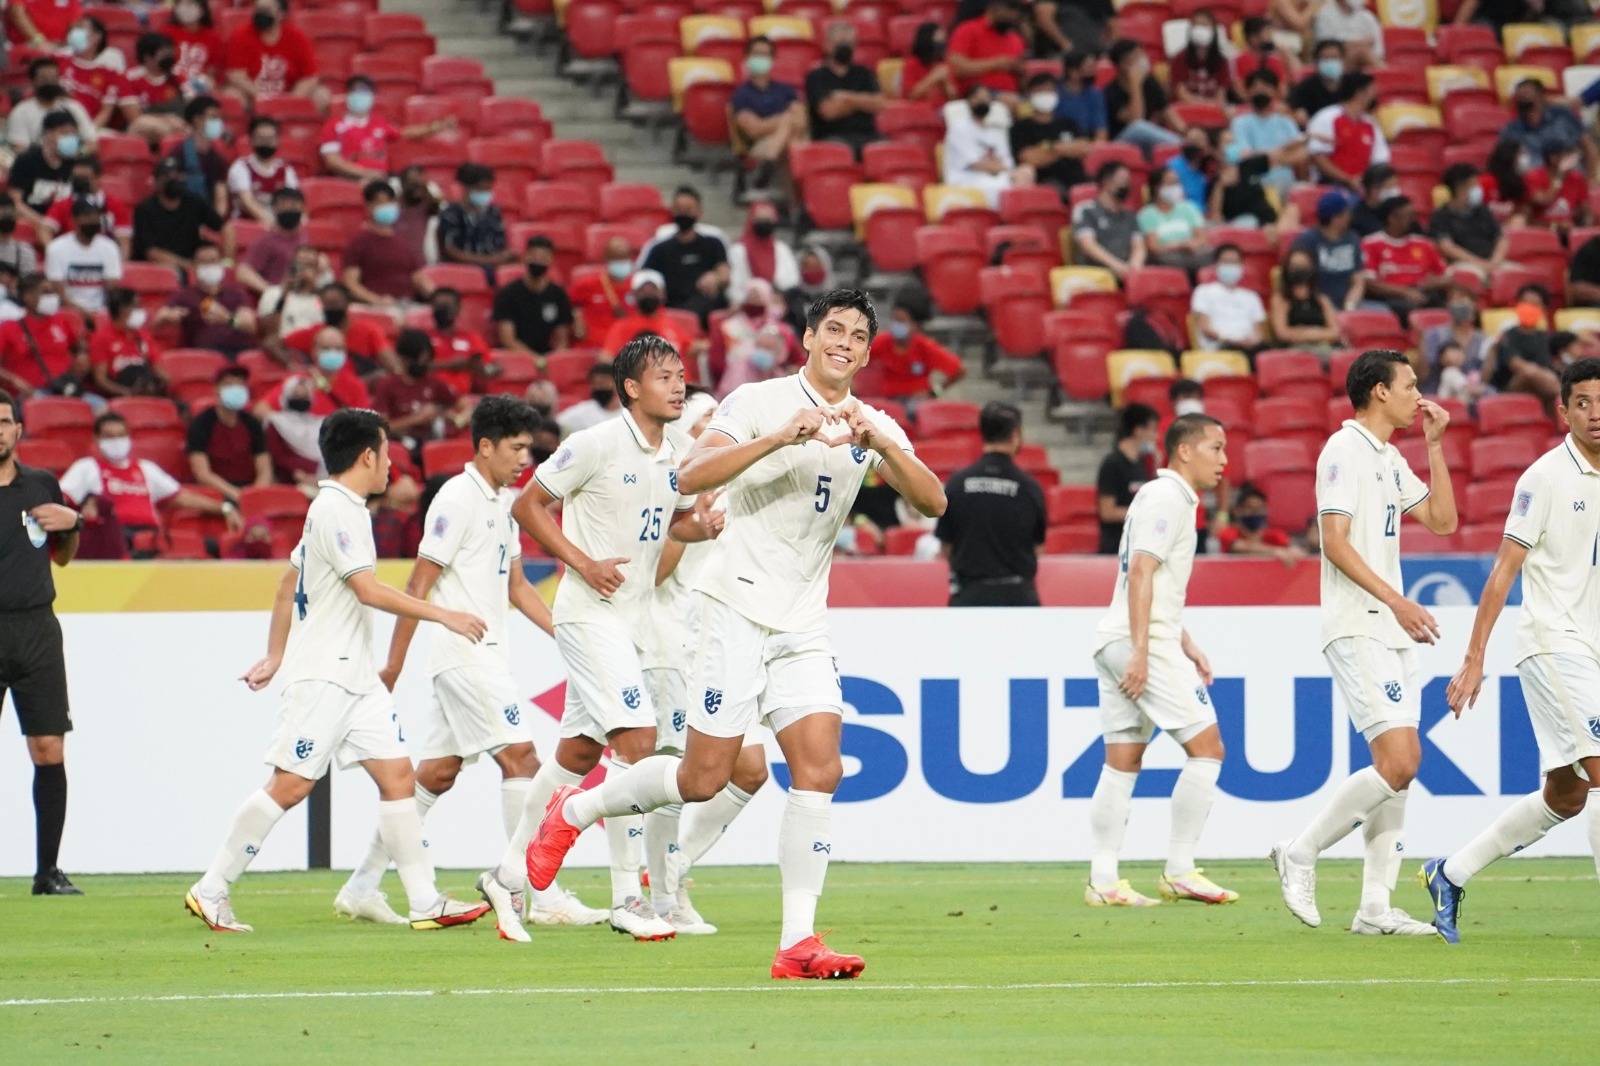 Thailand finish as Group A leaders, after 2-0 win over TeamSG in AFF Suzuki Cup 2020!